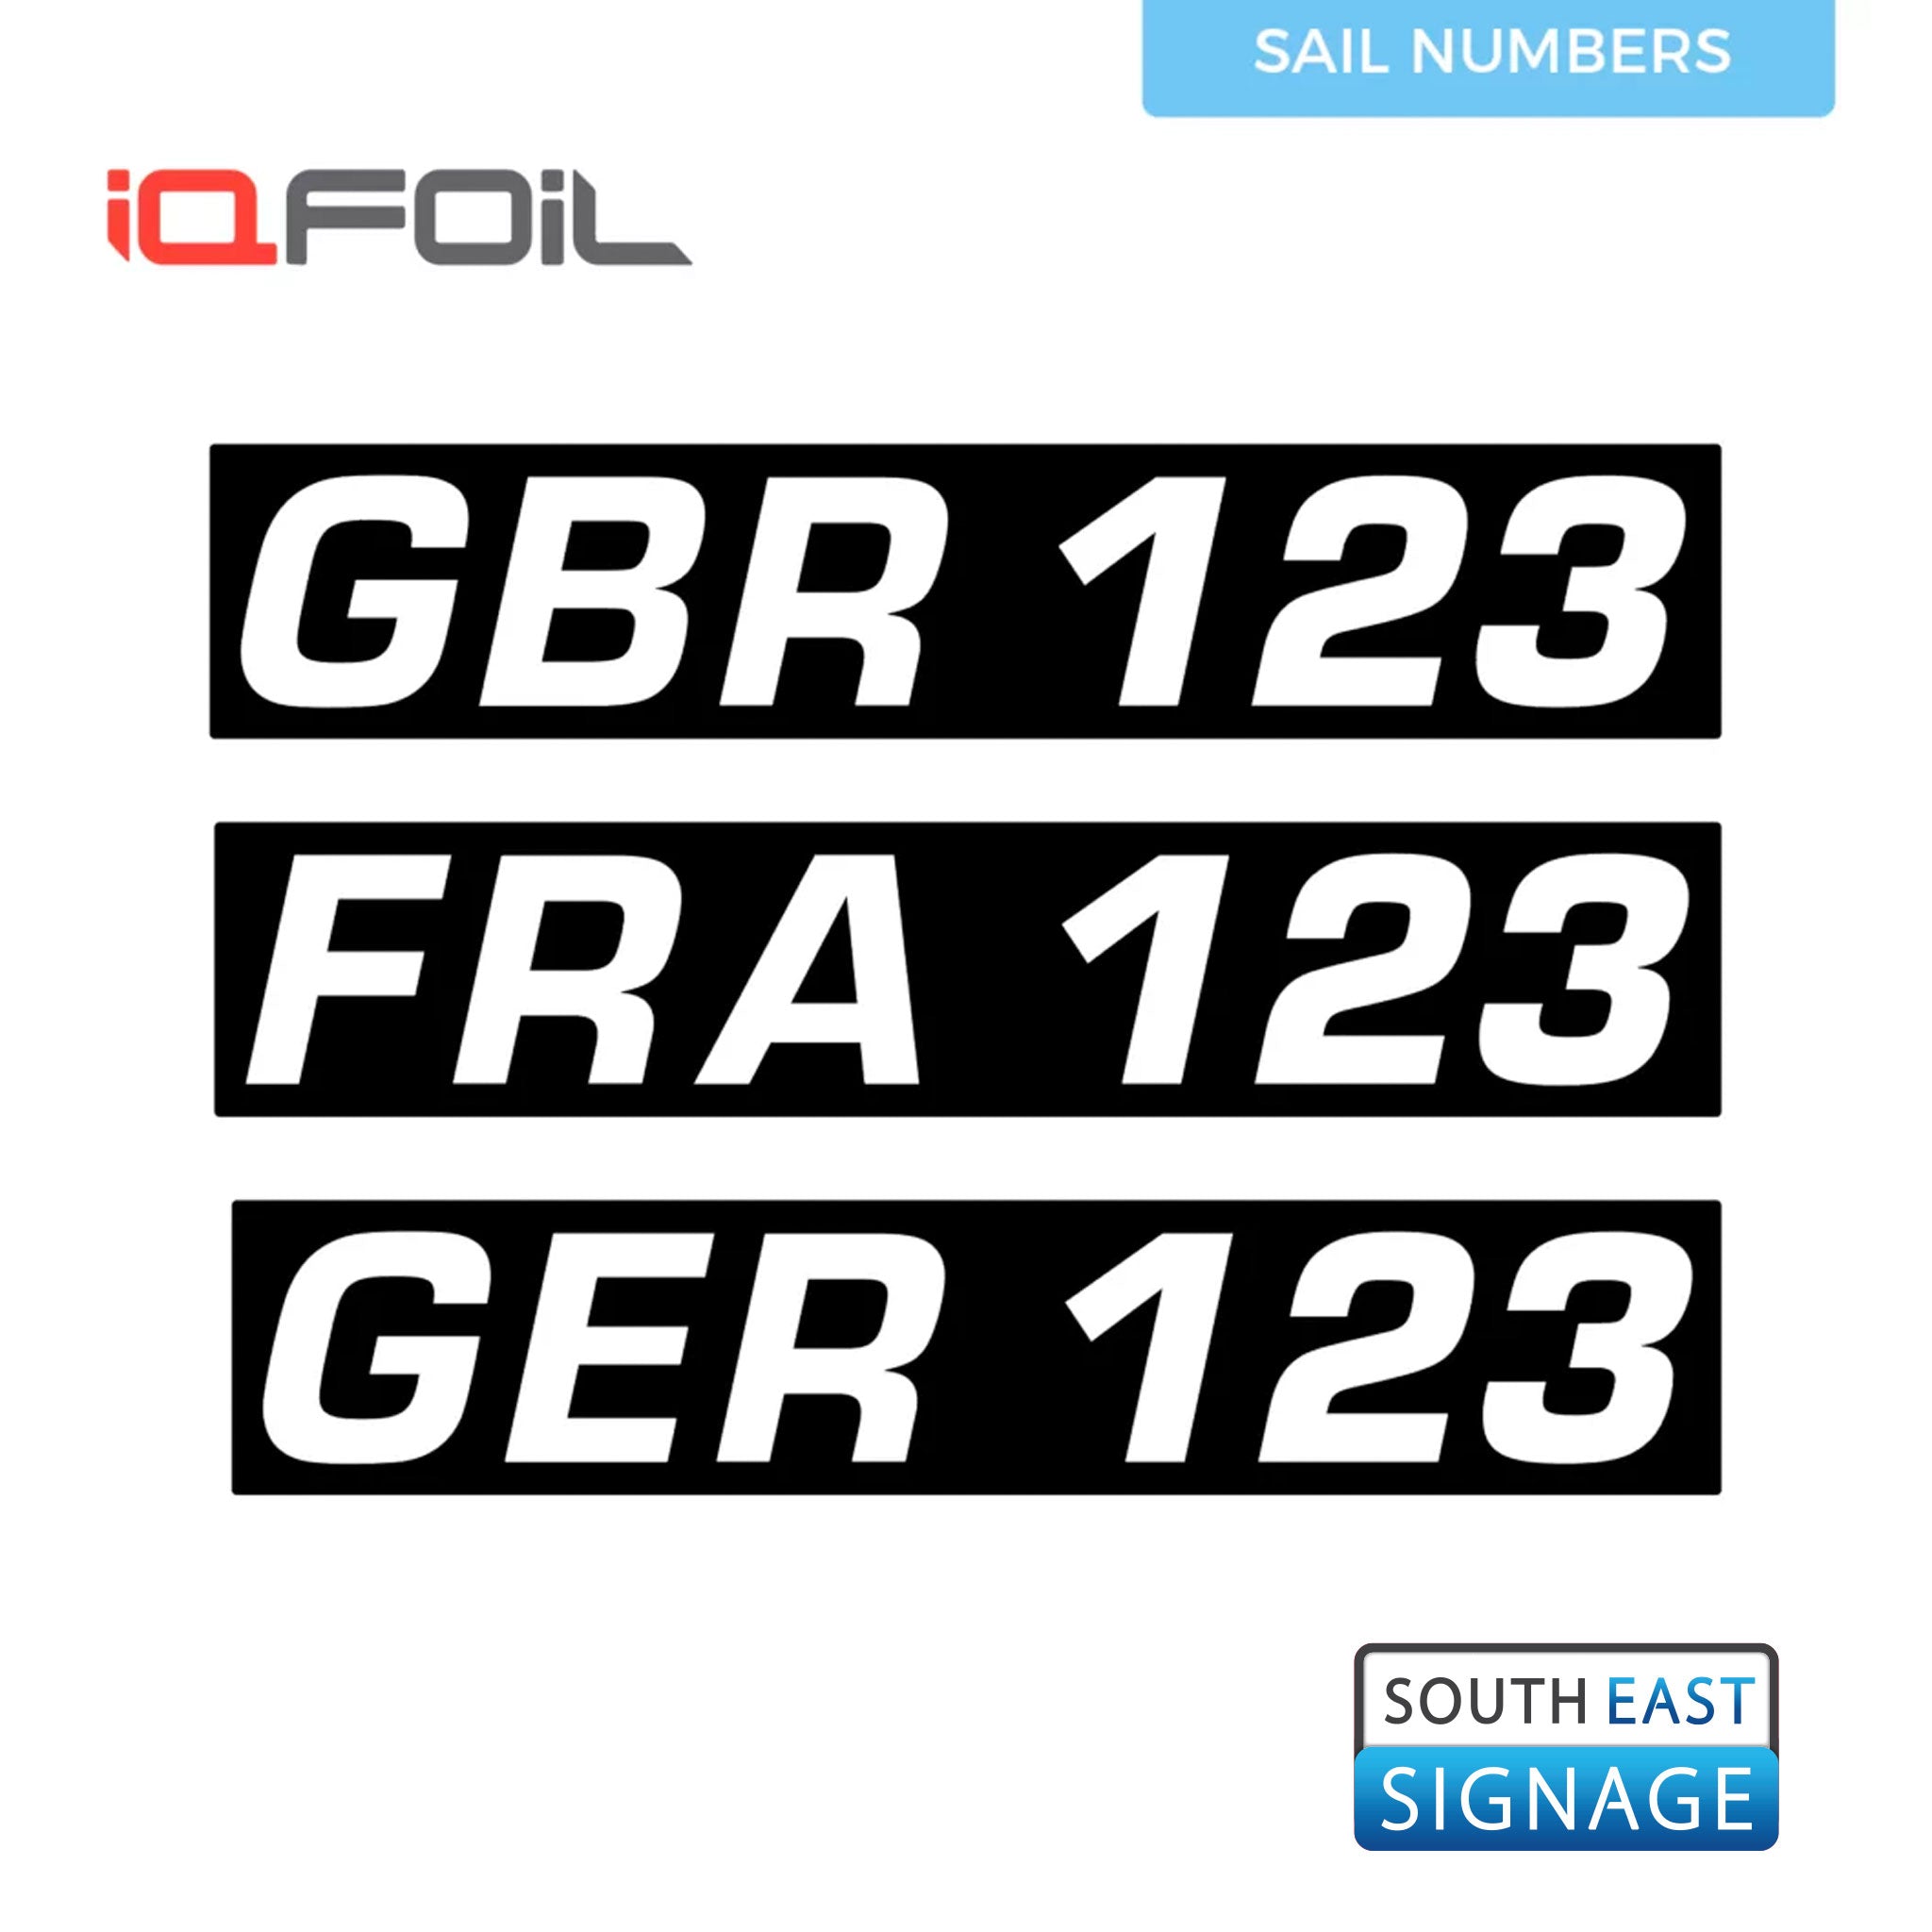 South East Signage iQFOIL Class Windsurfing Sail Number Set - Worthing Watersports - SES-iQFOIL-NUM - Sail Sticker - South East Signage